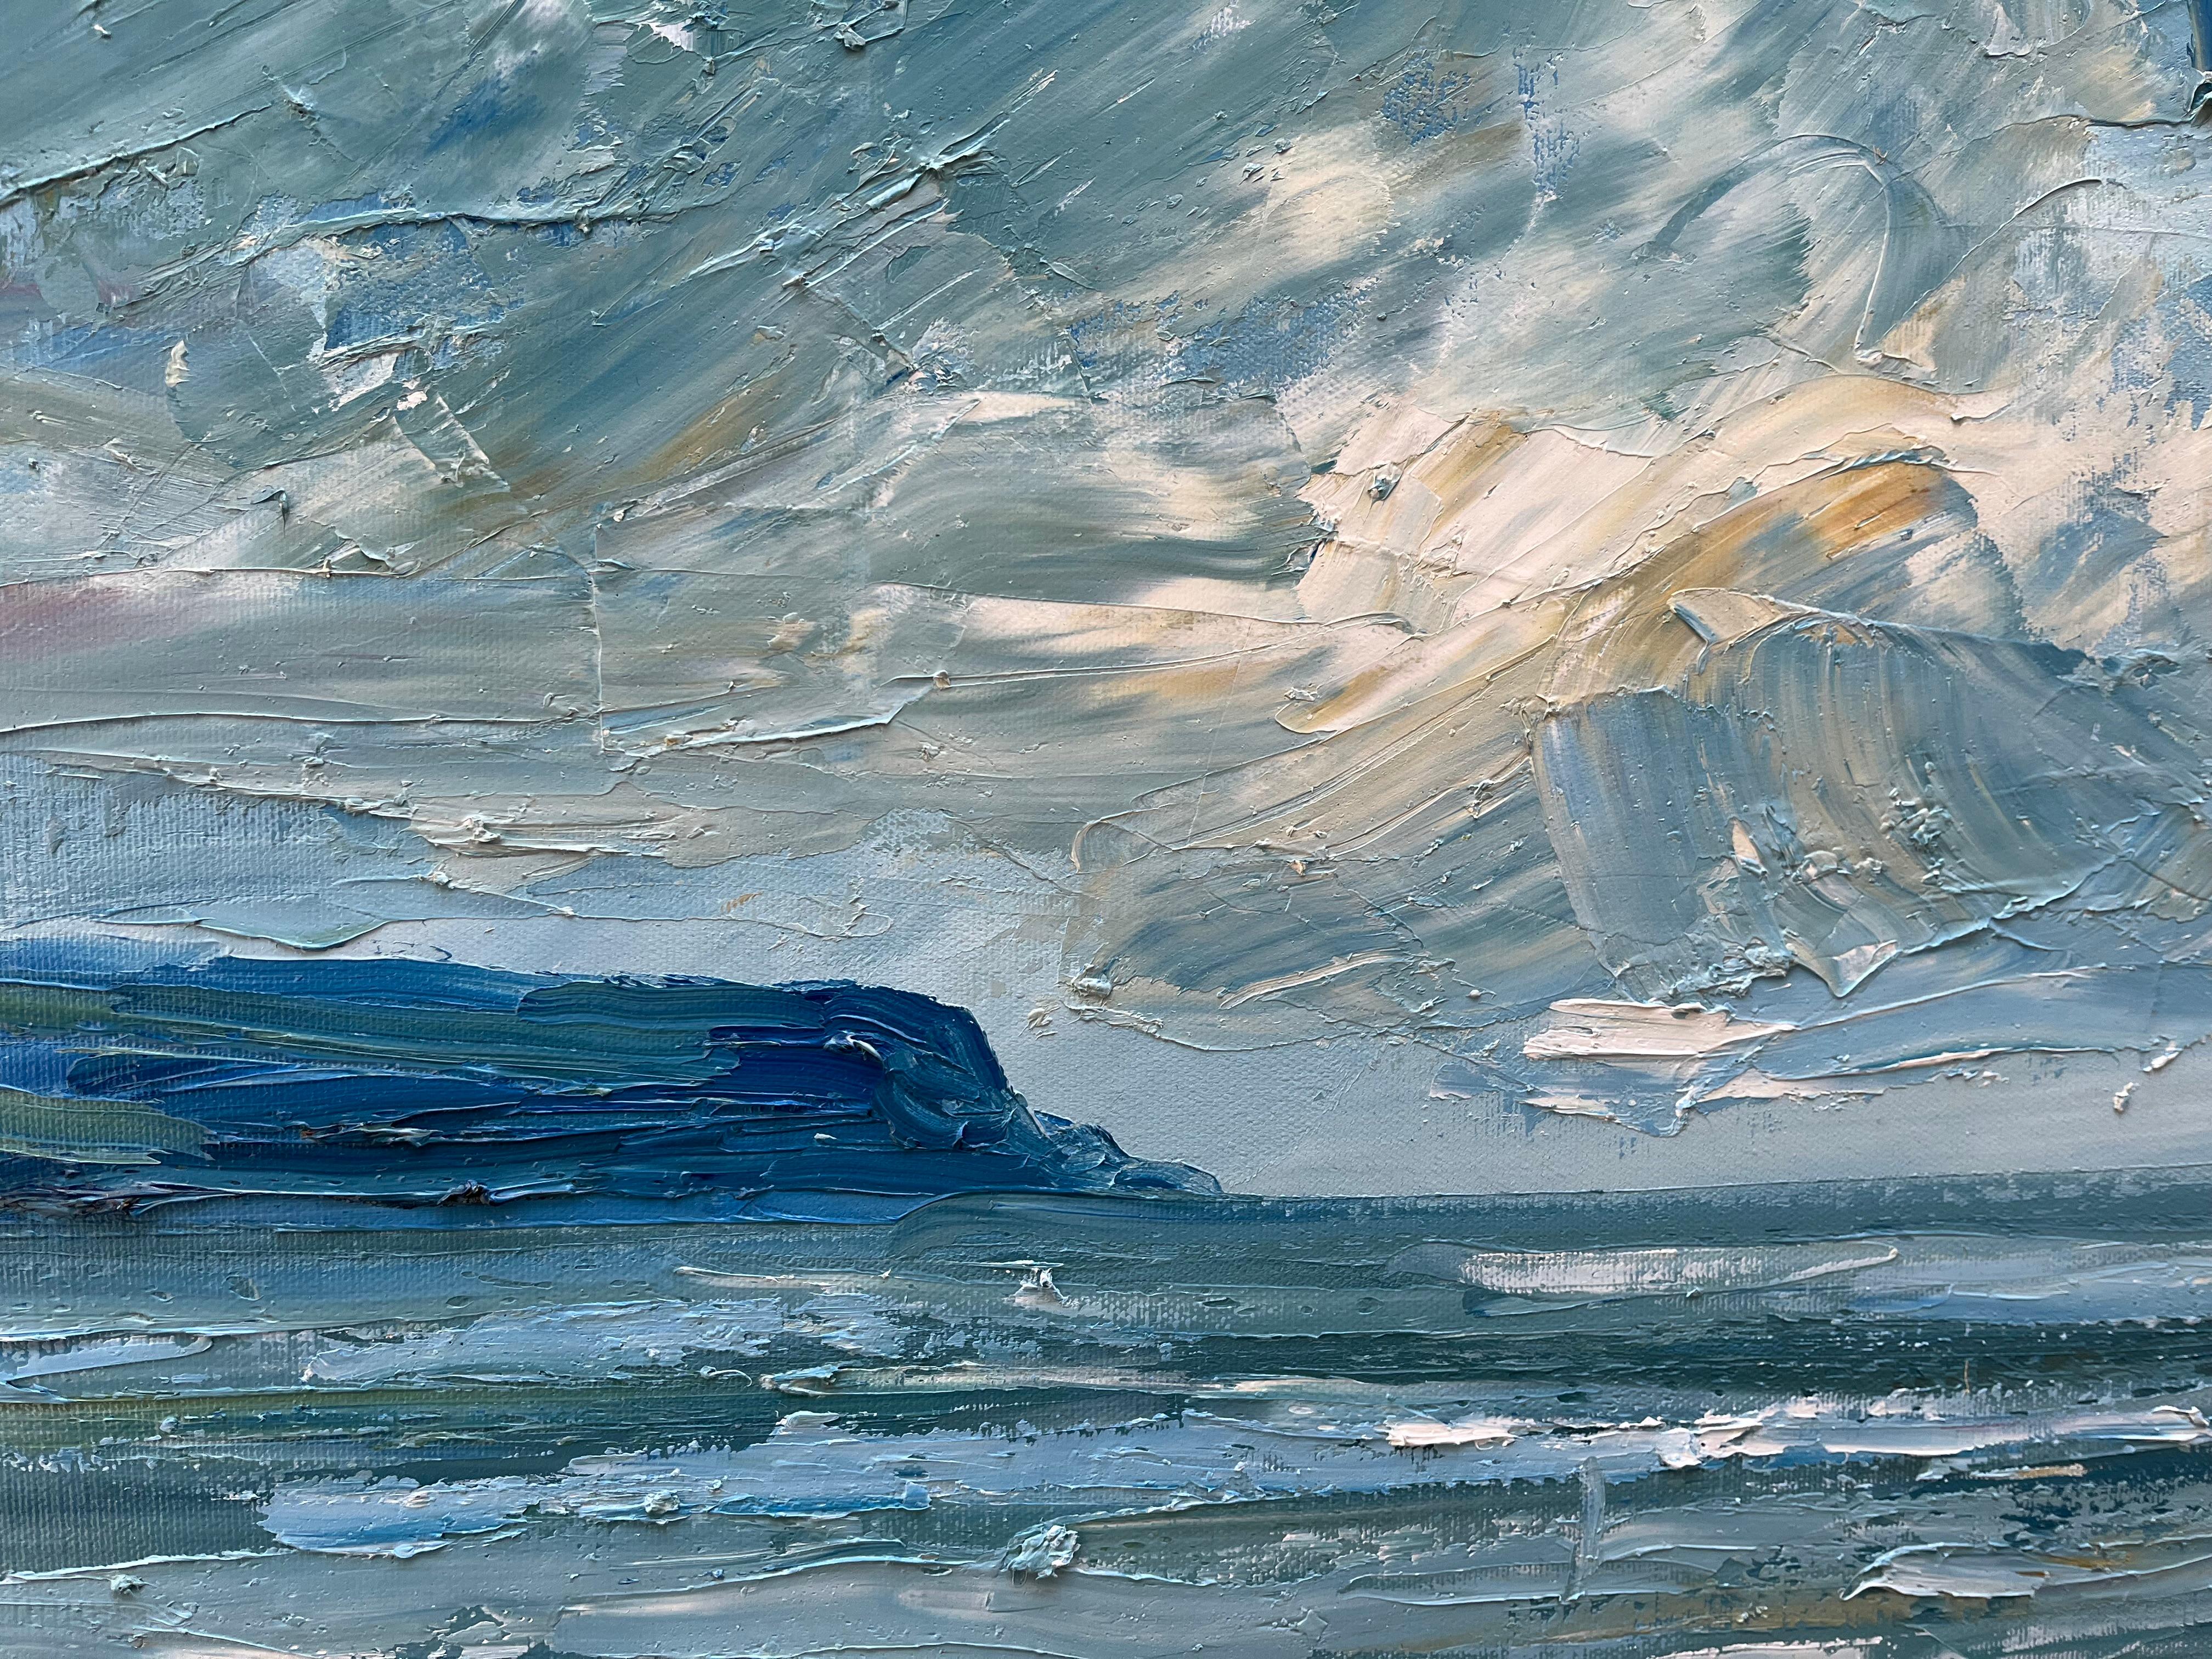 Dramatic impasto view of Daymer Bay near Padstow, Cornwall. A view from Hawker's Cove, Cornwall.

ADDITIONAL INFORMATION: 
Daymer Bay from Hawker’s Cove by Rupert Aker [2023]
Original painting
Signed by artist
Oil Paint on Canvas
Framed size: 85 H x